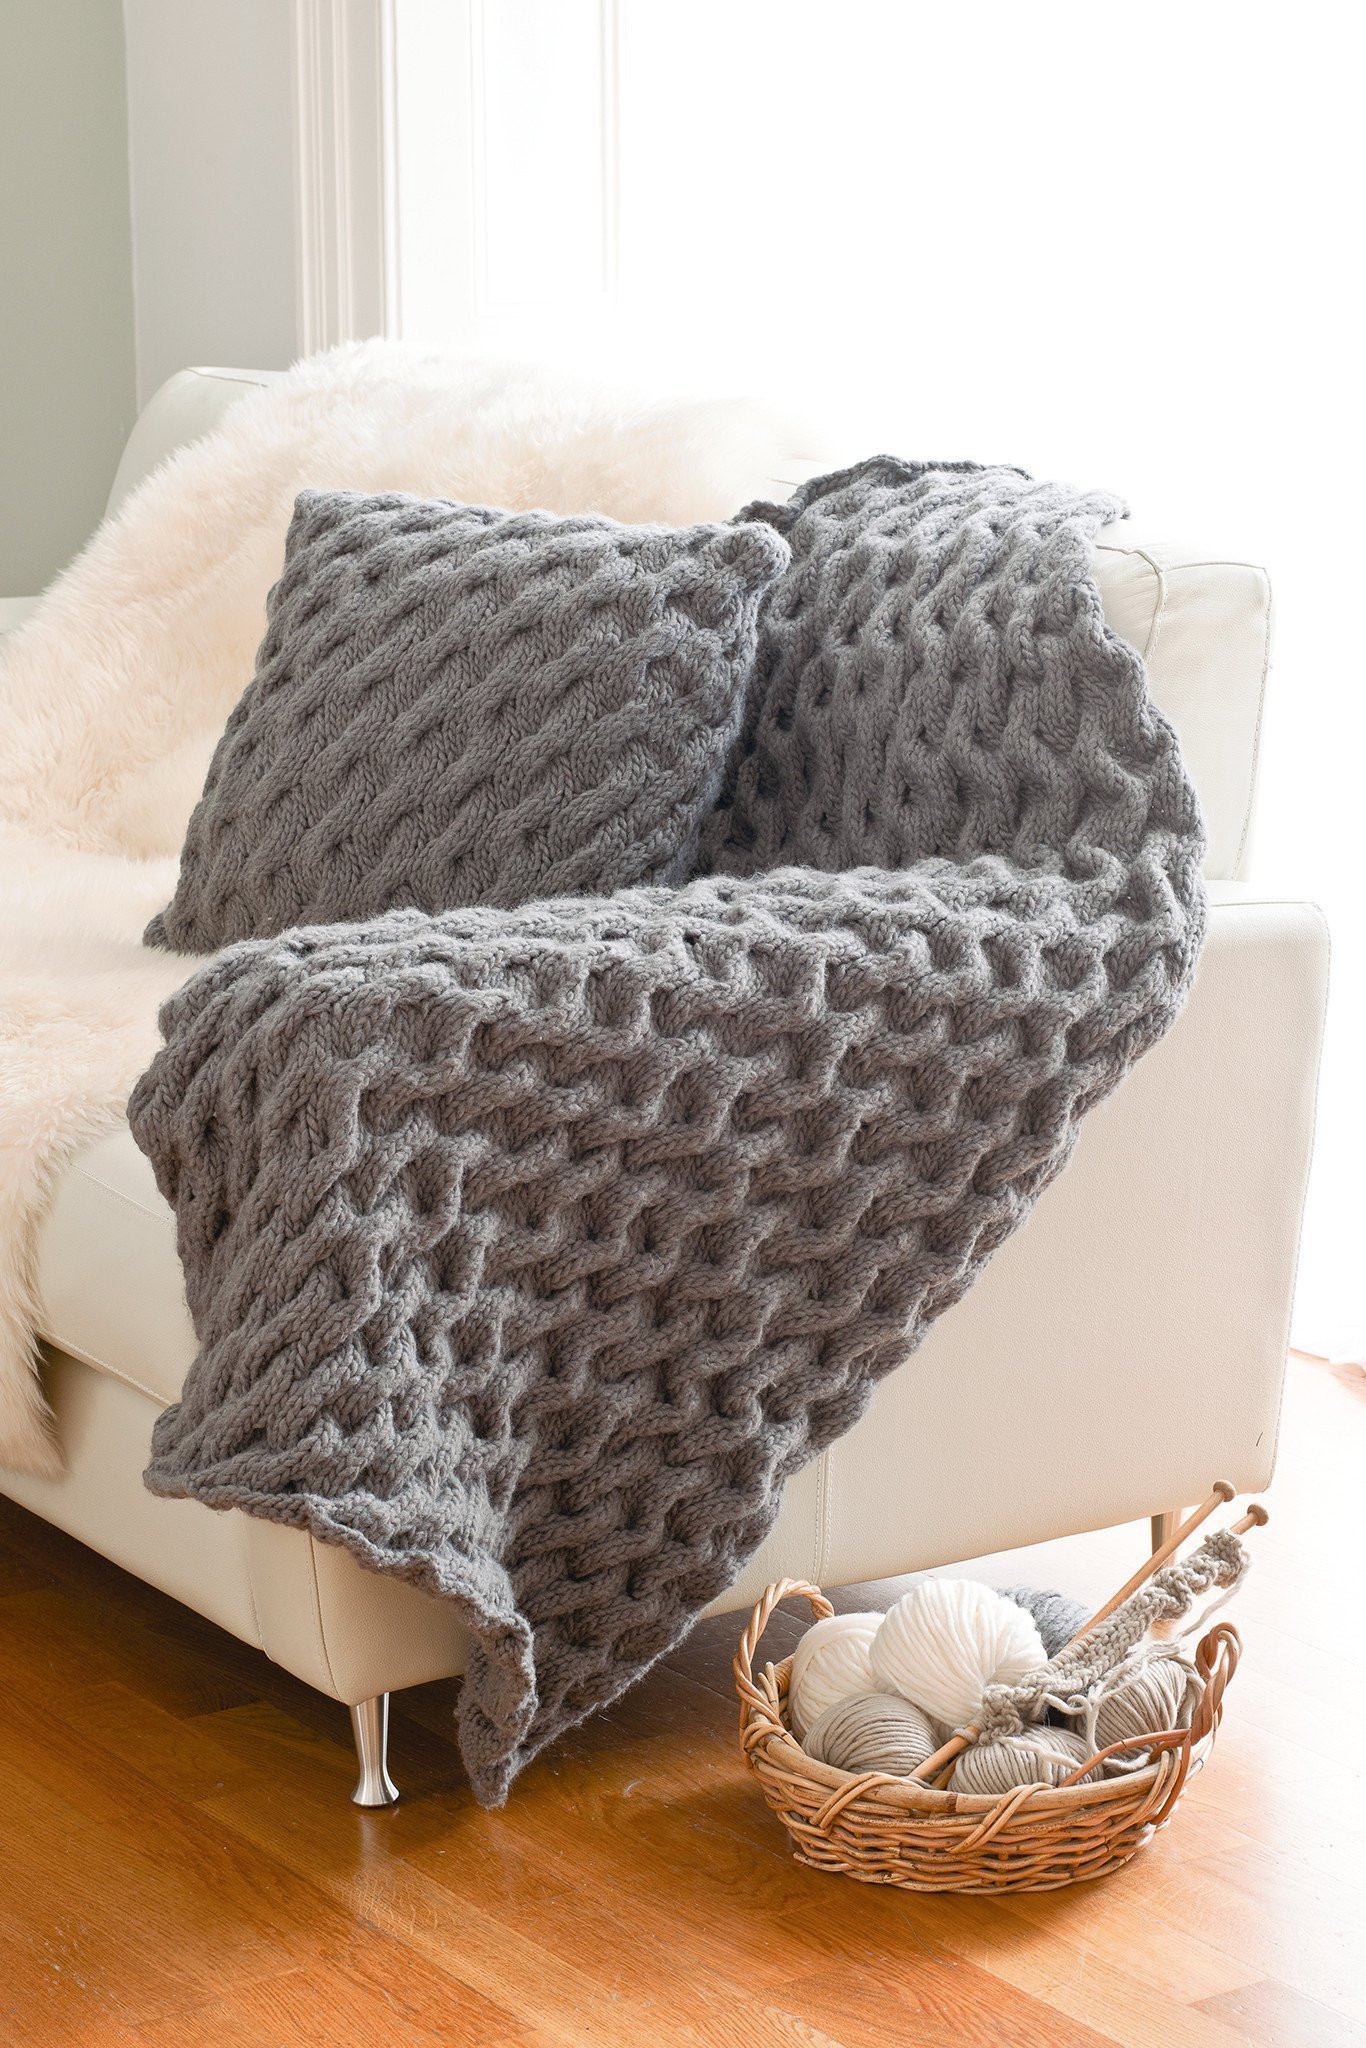 Knitting Patterns For Cushions Cushions And Throws Set Knitting Patterns